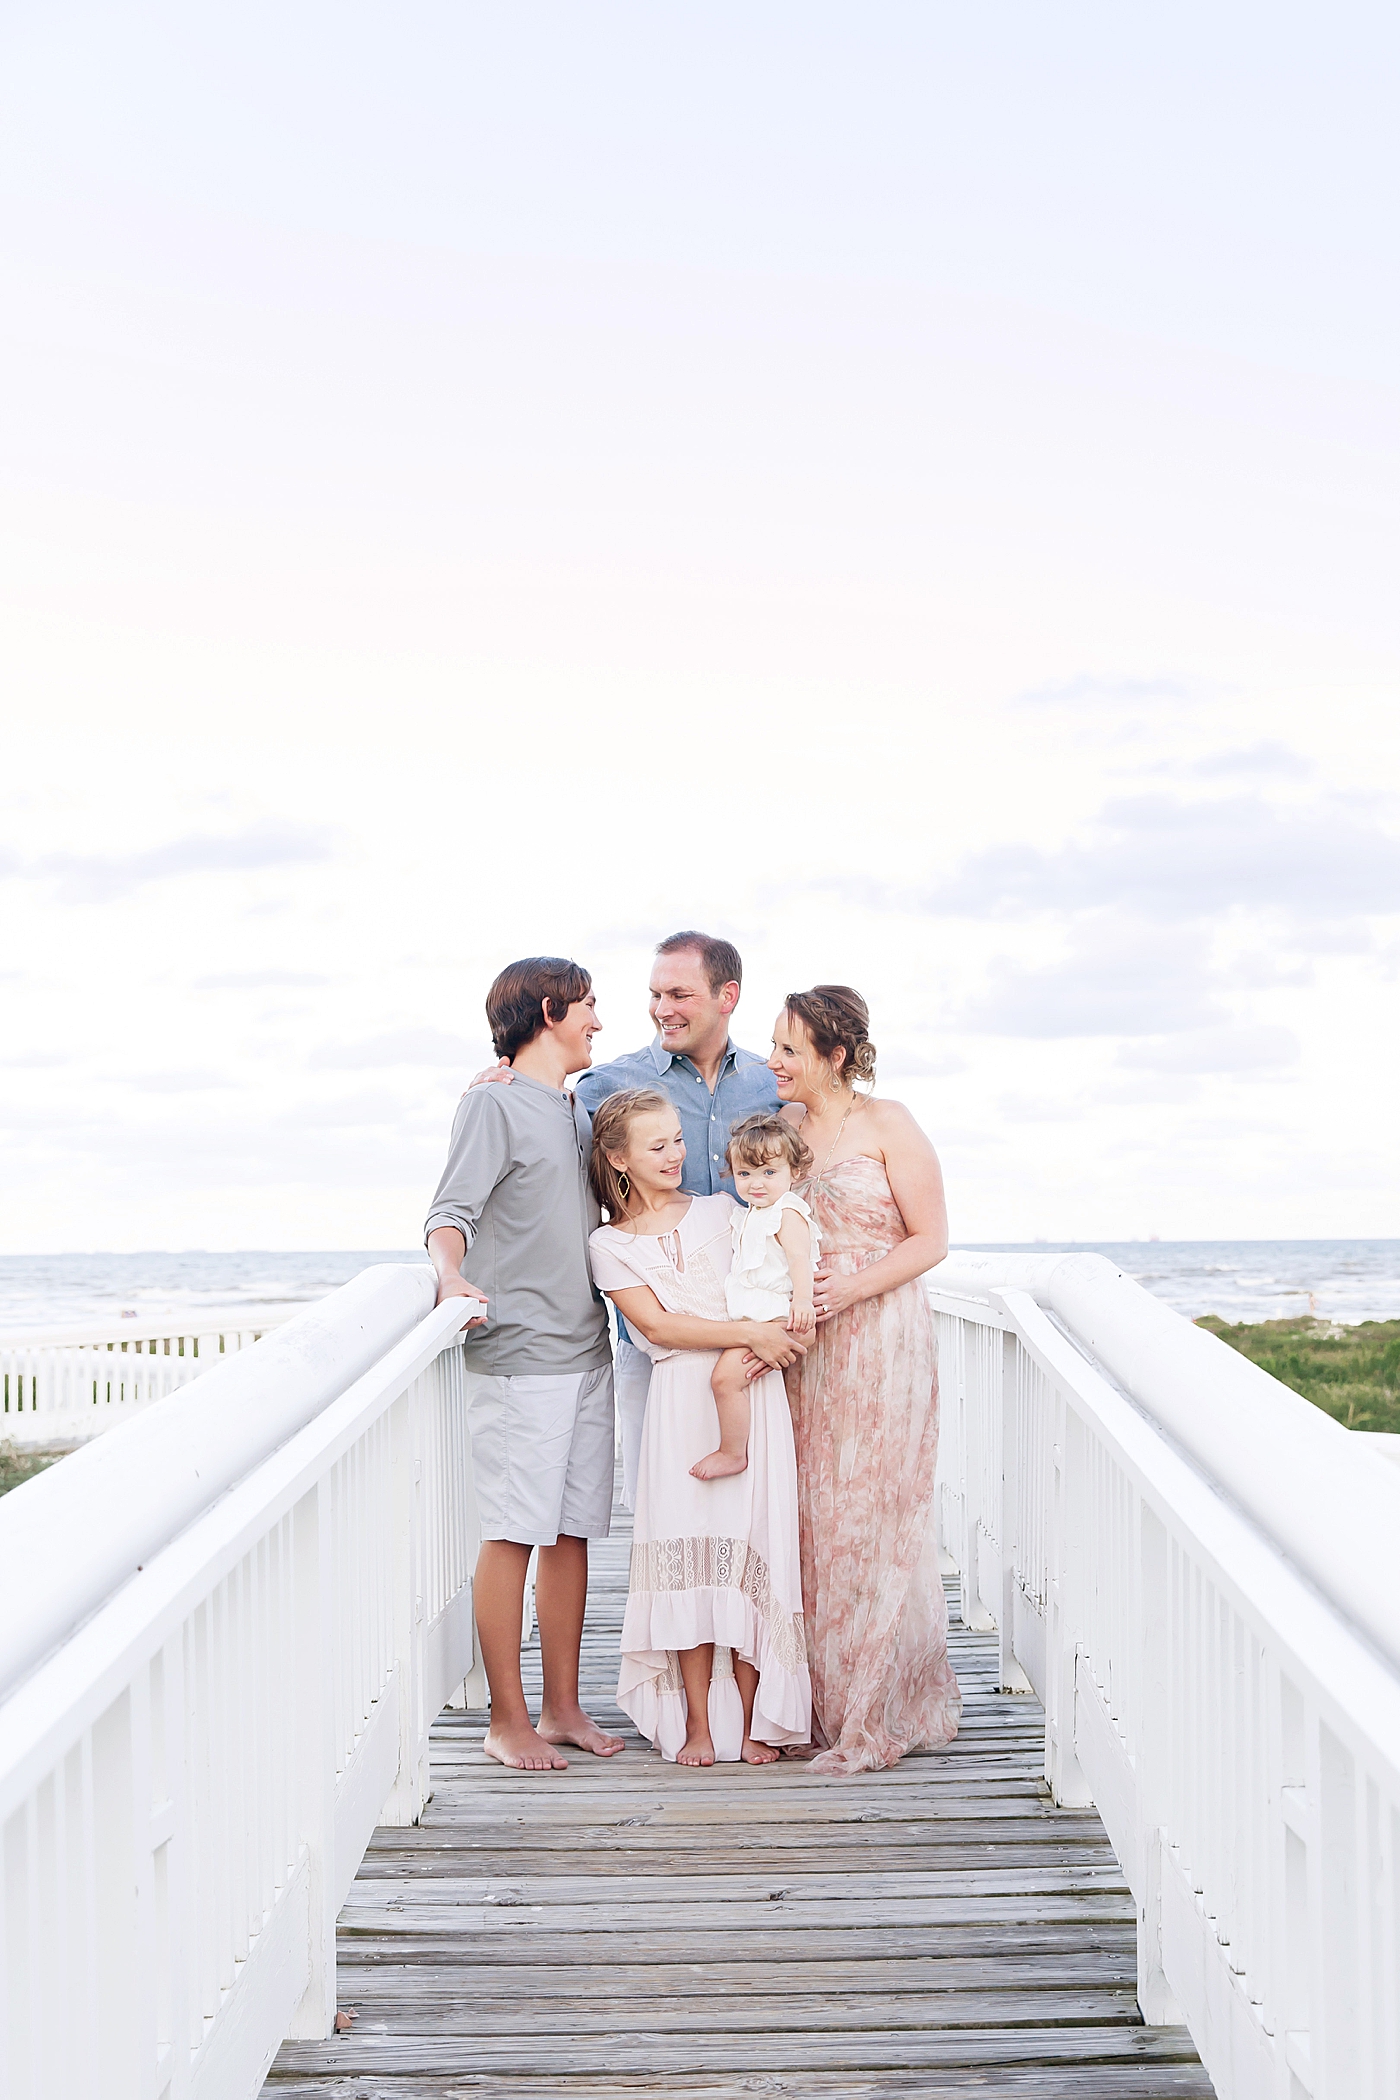 Family portrait with the beach in the background. Photo by Fresh Light Photography.